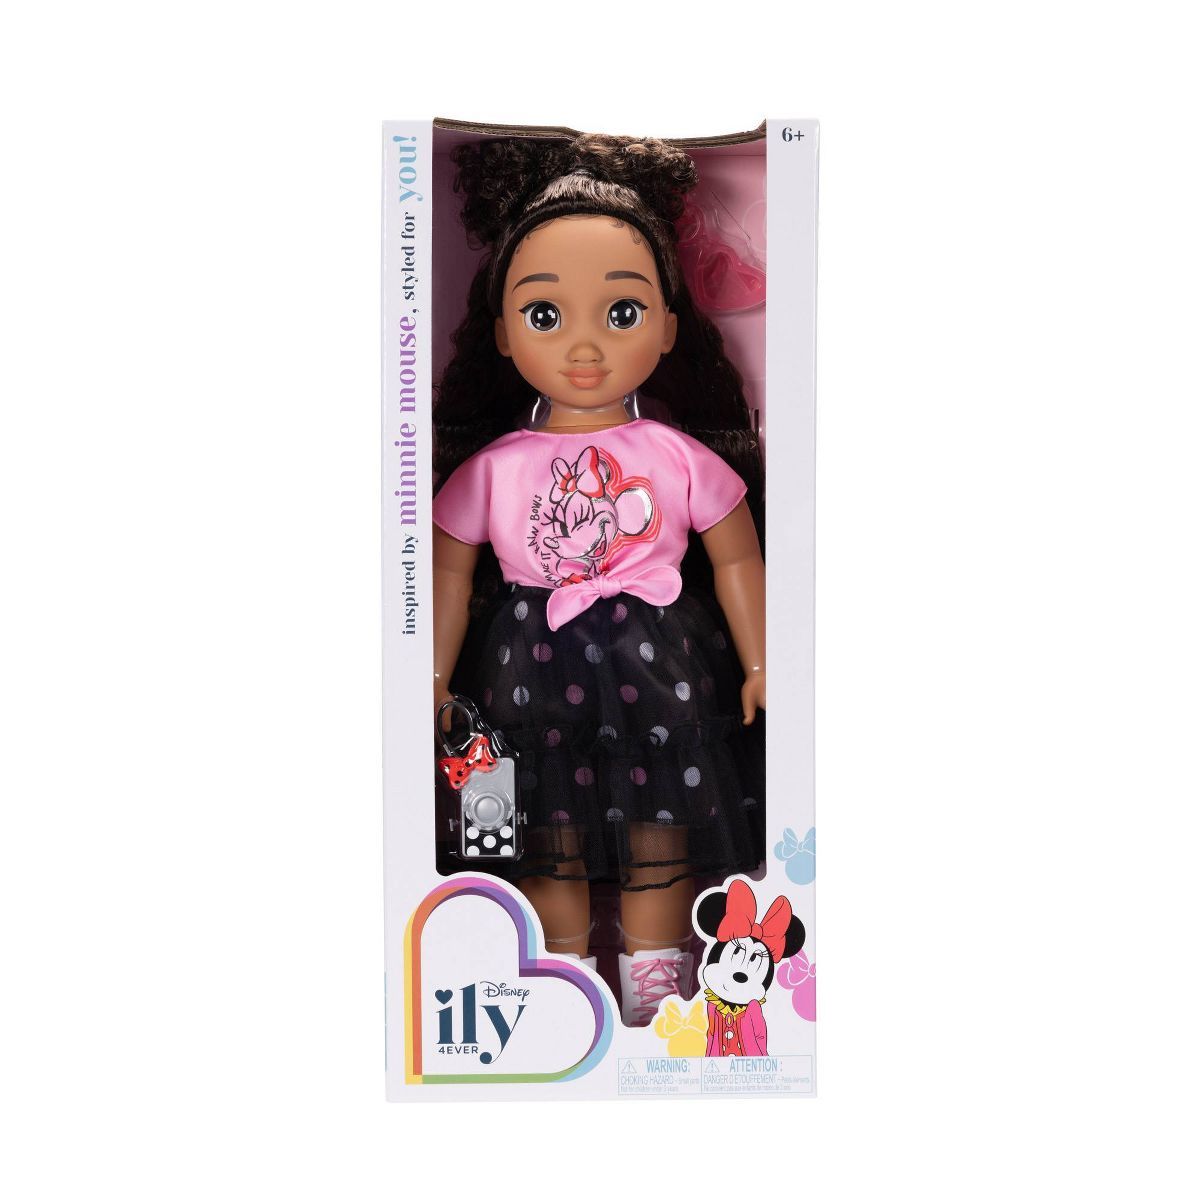 Disney ily 4EVER Inspired by Minnie Mouse 18" Doll Pink Top | Target